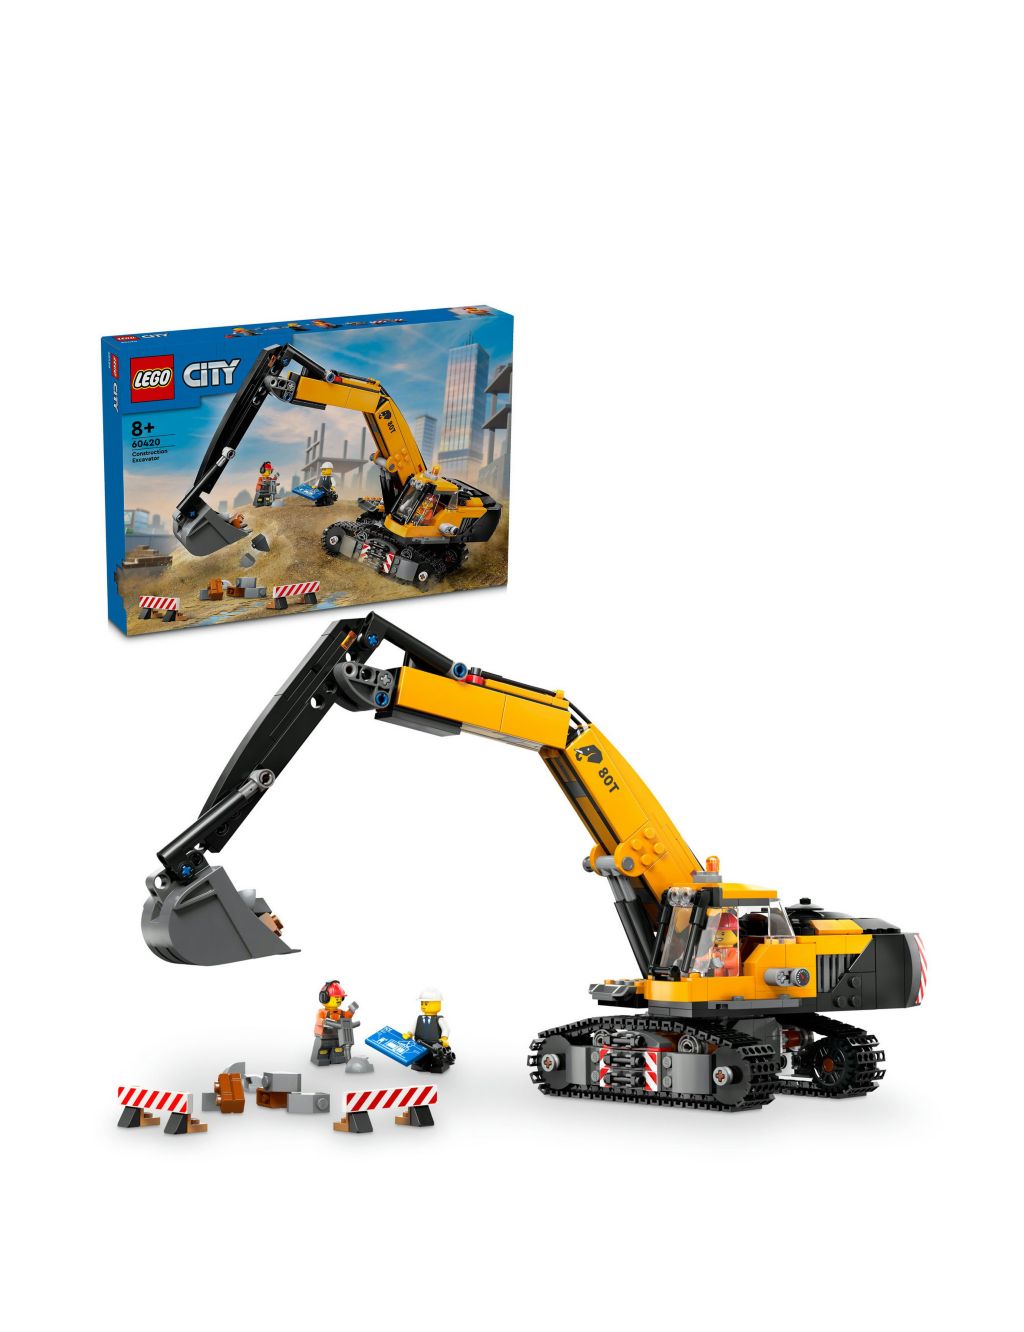 LEGO® City Yellow Construction Excavator Toy Digger 60420 (8+ Yrs)